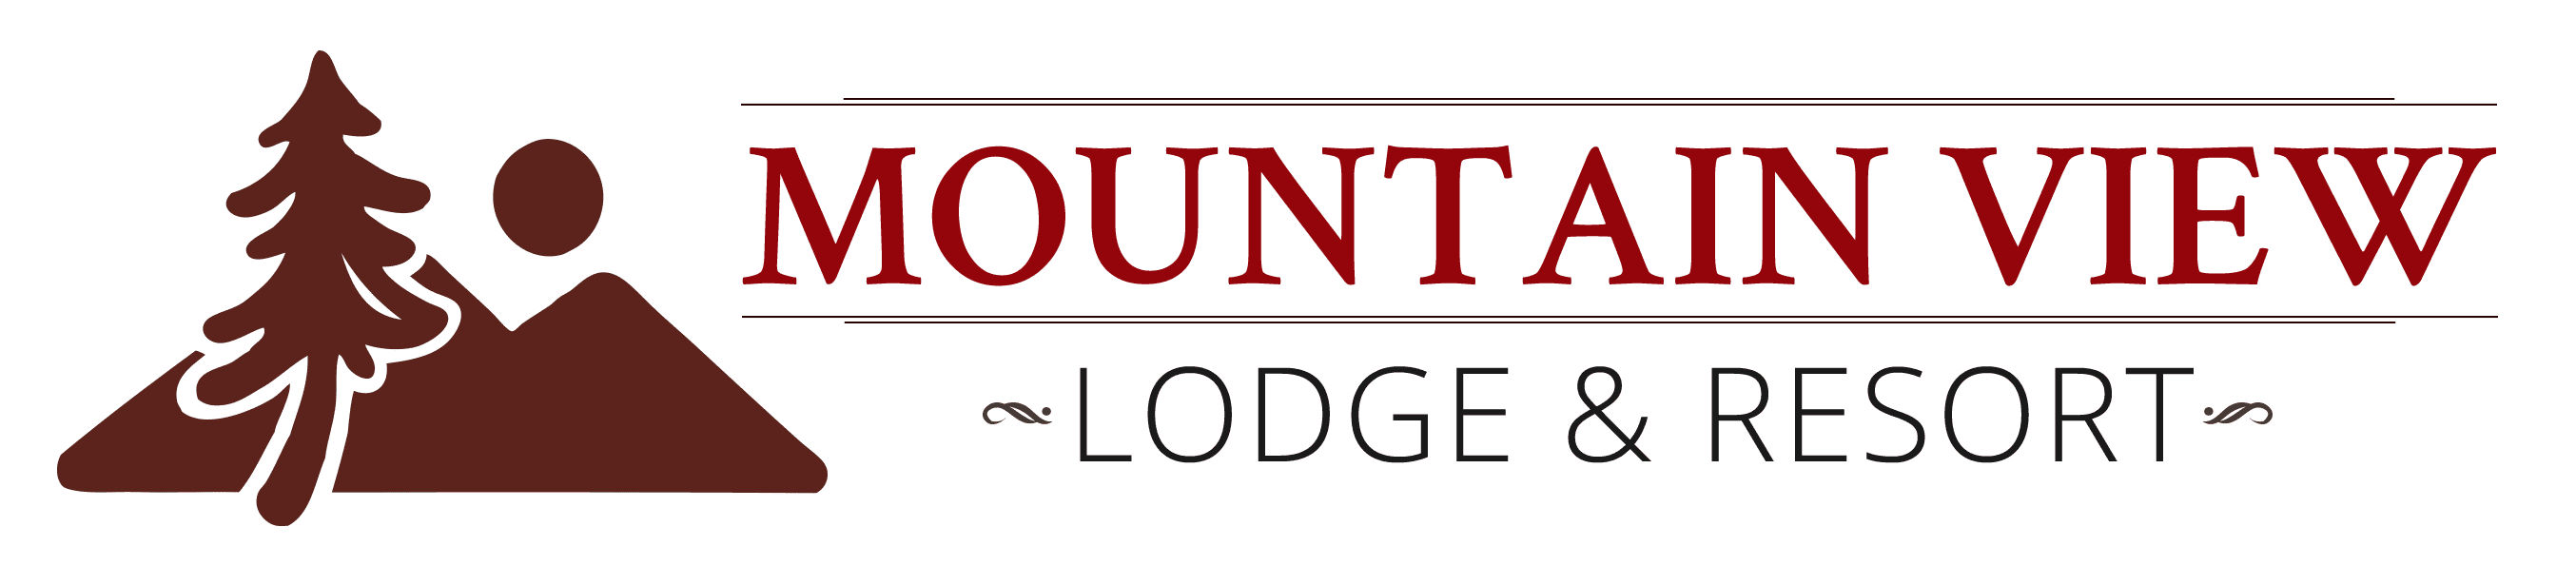 Mountain View Lodge and Resort